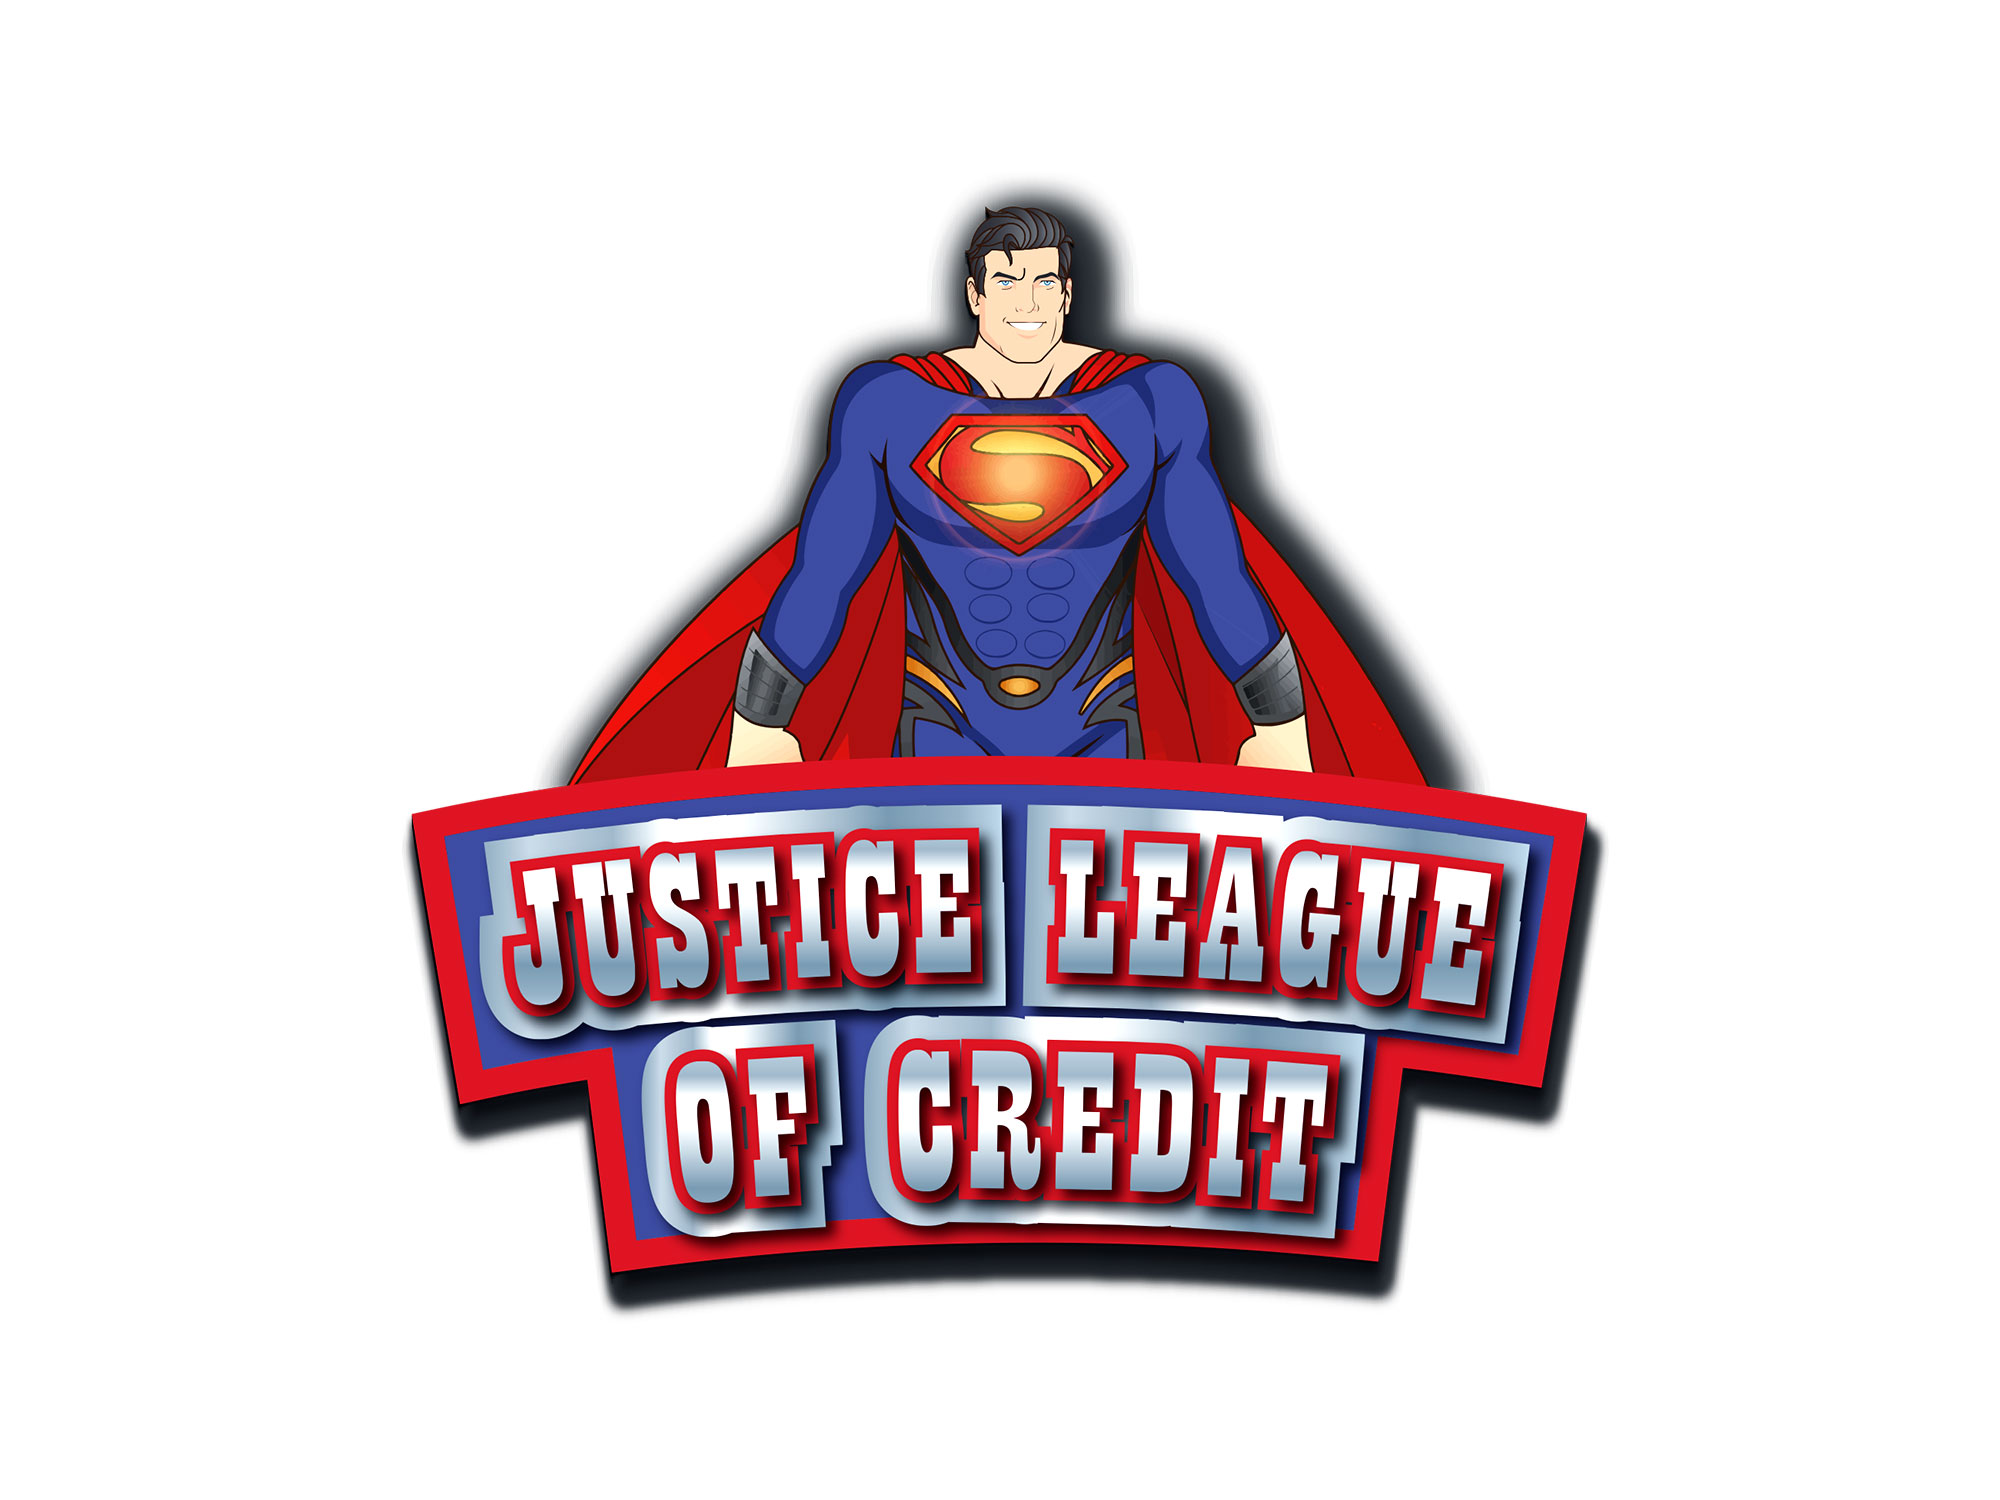 Justice League of Credit